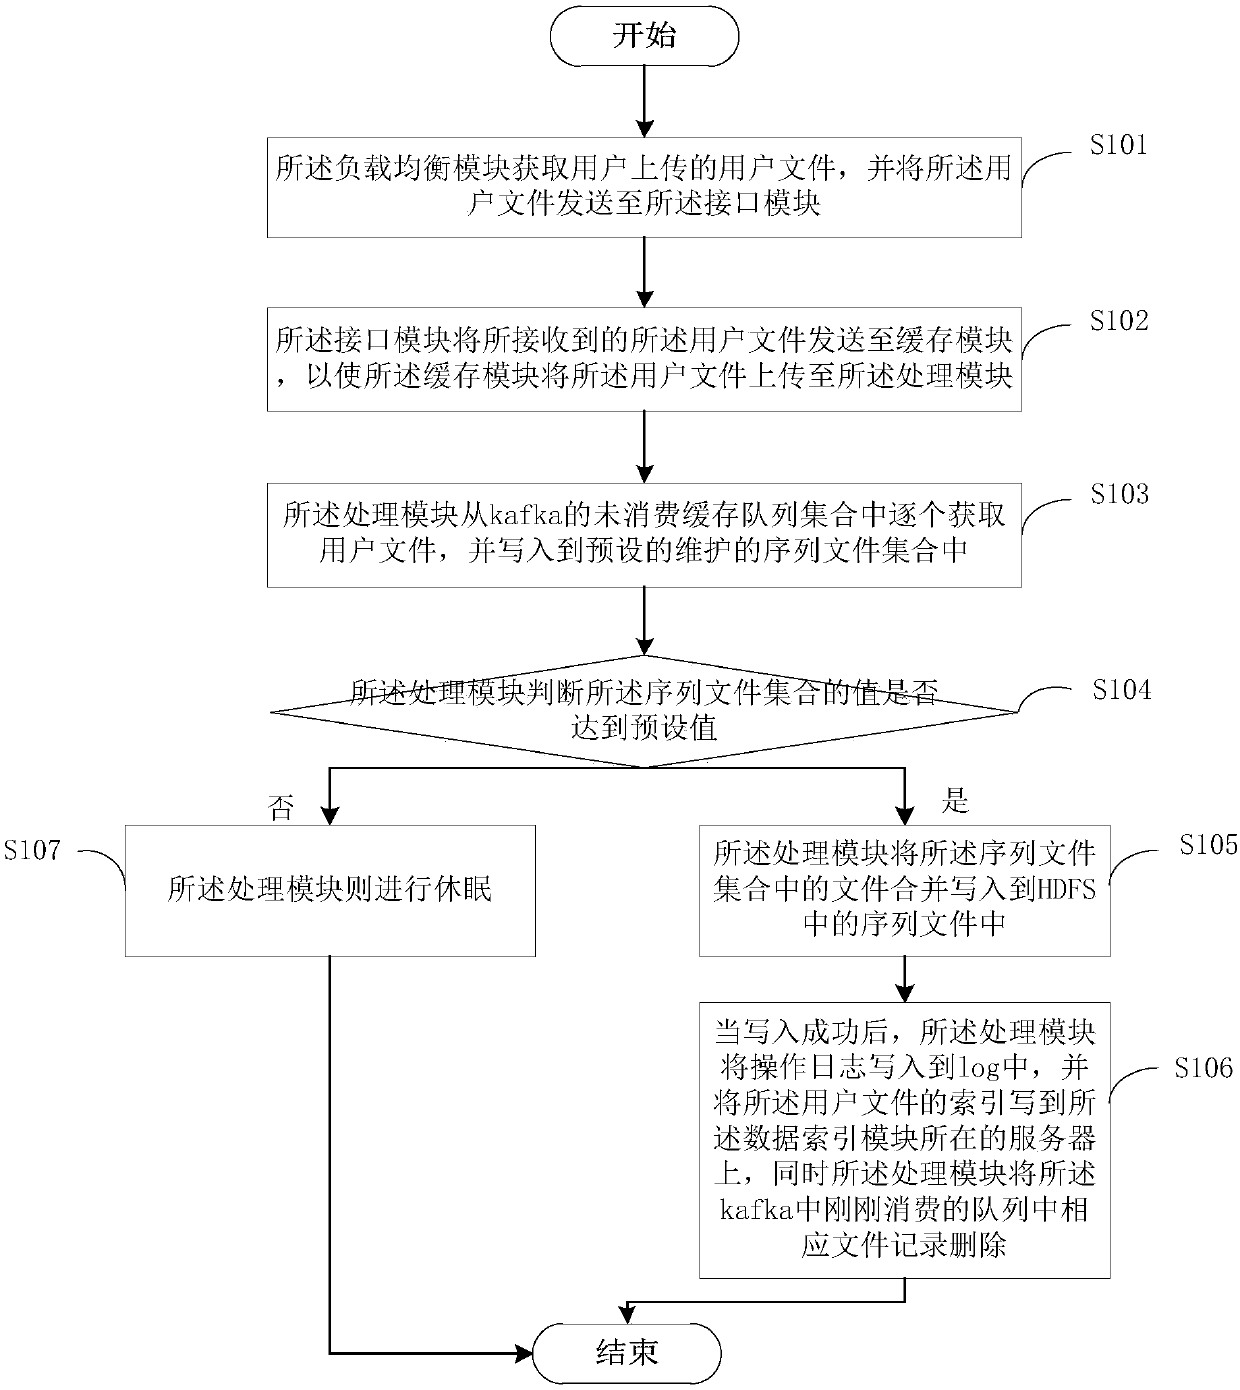 Mass medical data storage system and data storage method suitable for files of different sizes